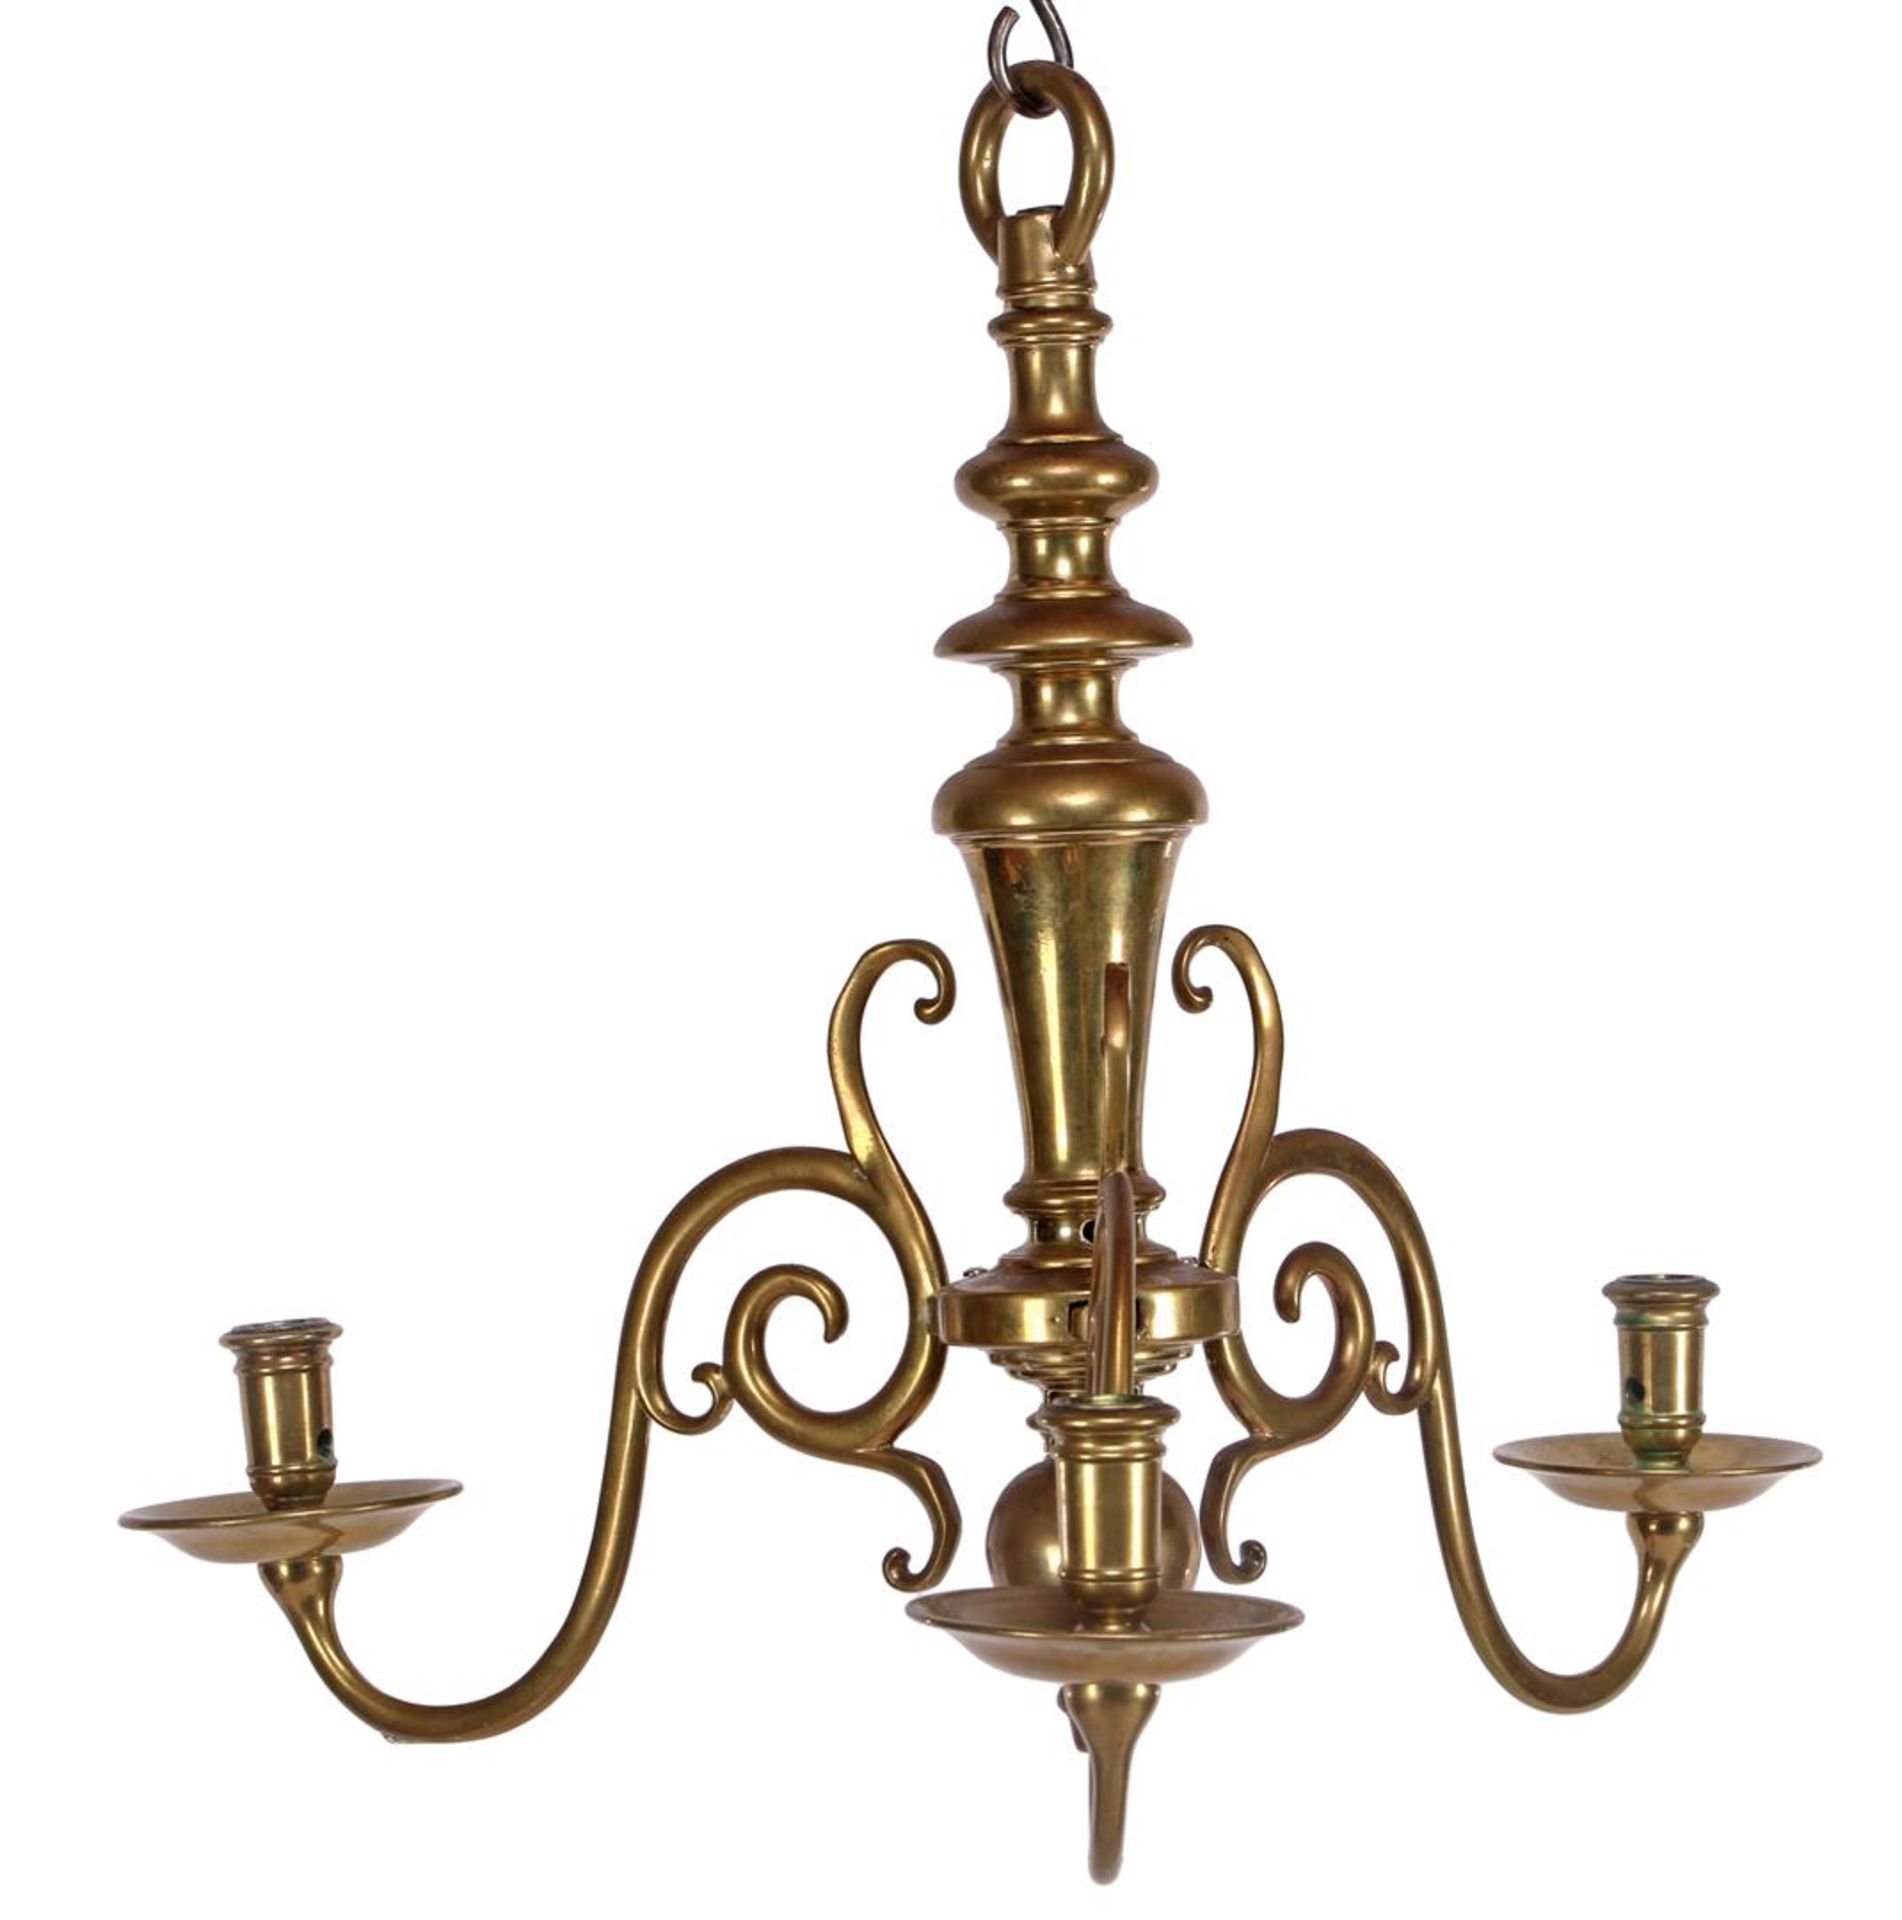 Bronze 3-light candle crown